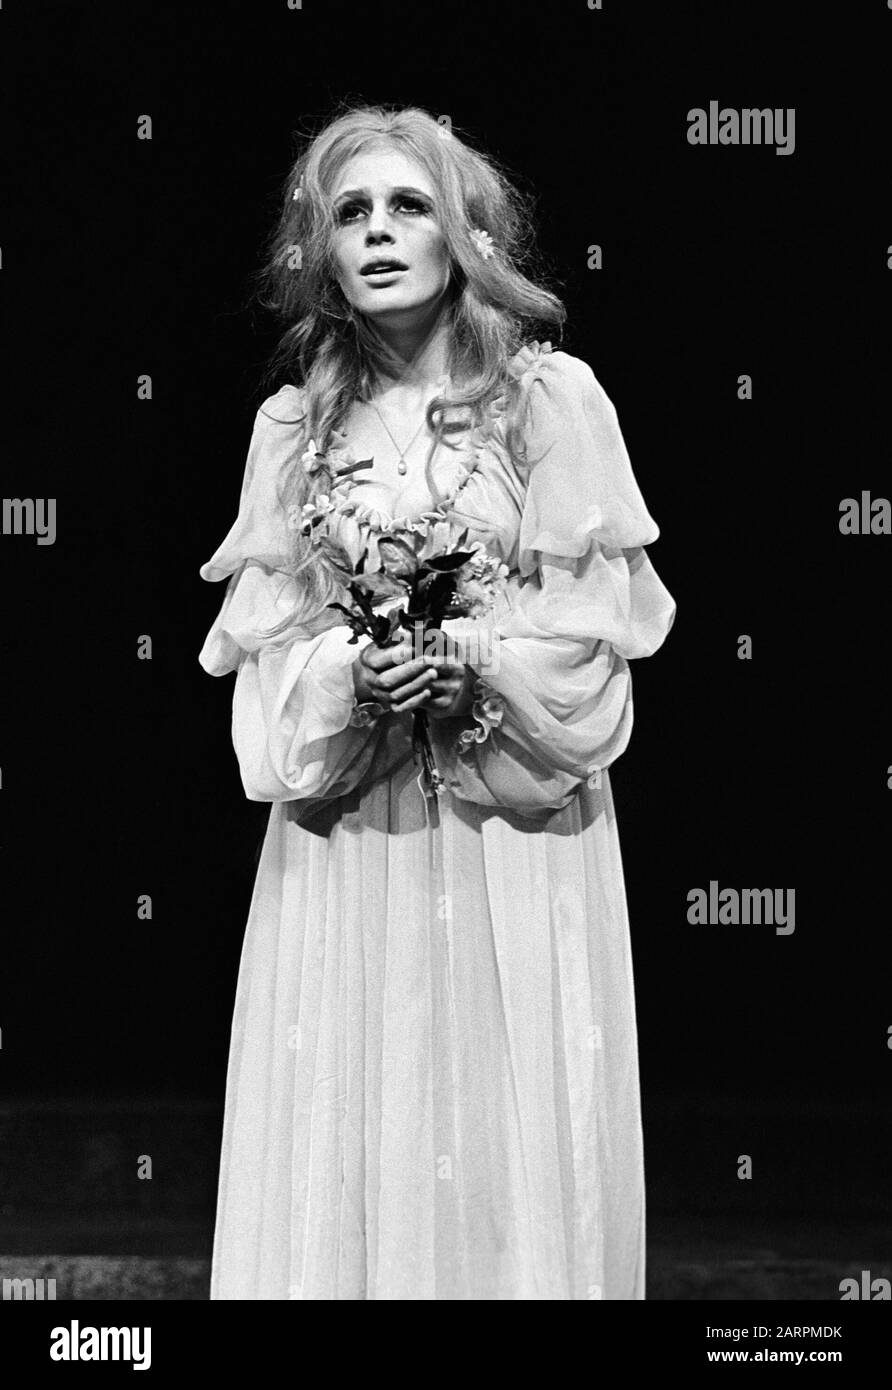 Marianne Faithfull as Ophelia in HAMLET by Shakespeare directed by Tony Richardson at the Roundhouse, London in 1969. Marianne Faithfull, English singer, songwriter and actress, born 29 December 1946 in Hampstead, London Stock Photo